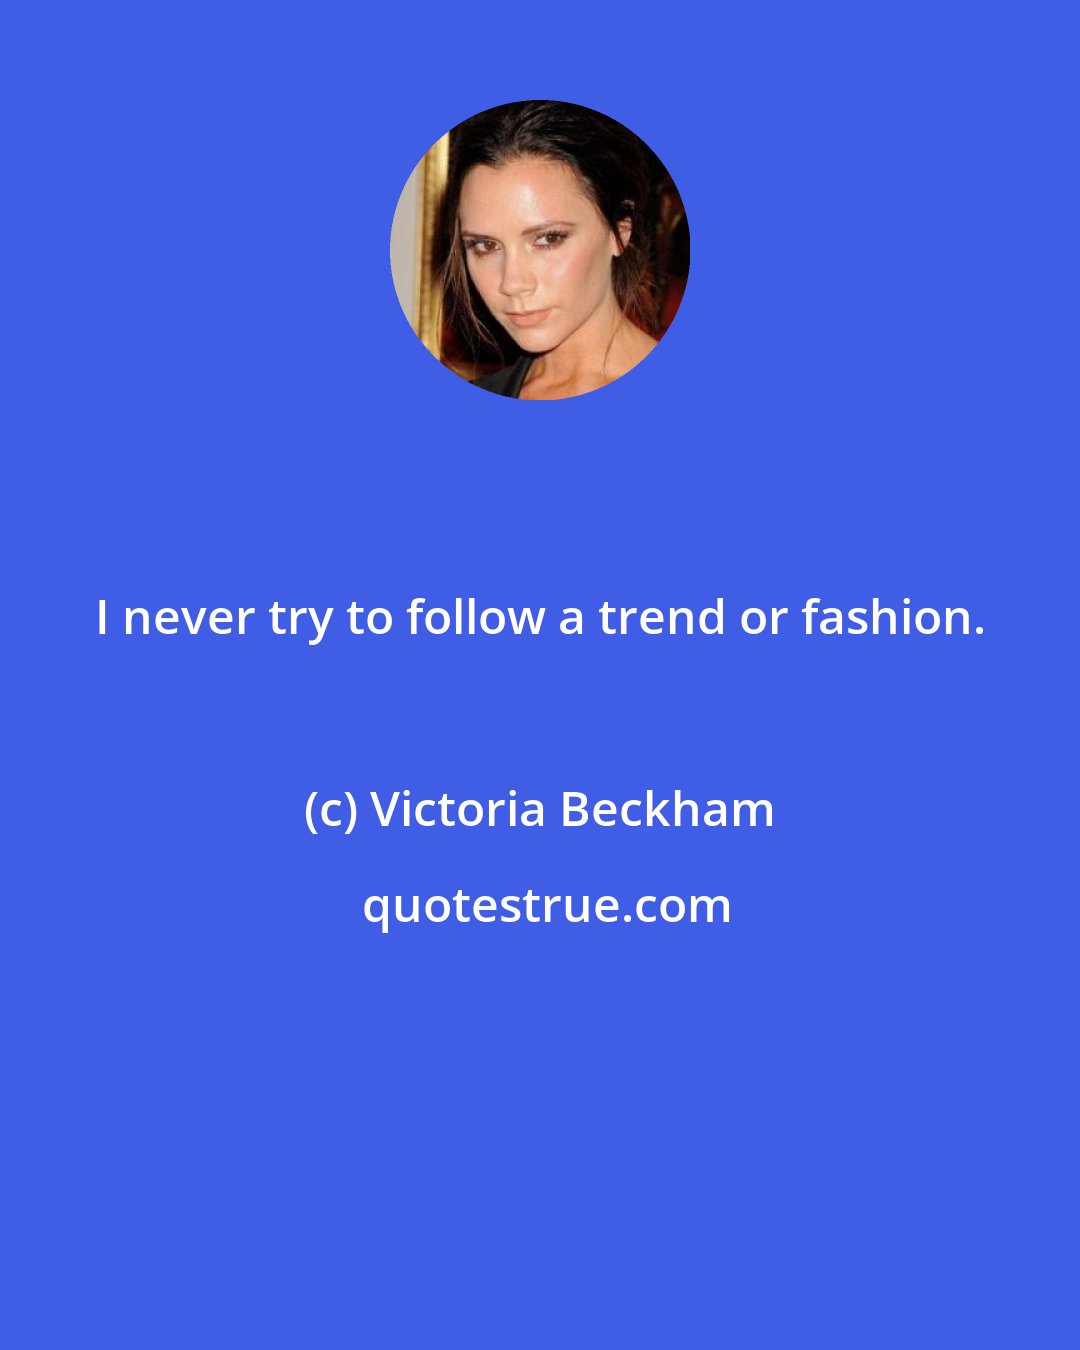 Victoria Beckham: I never try to follow a trend or fashion.